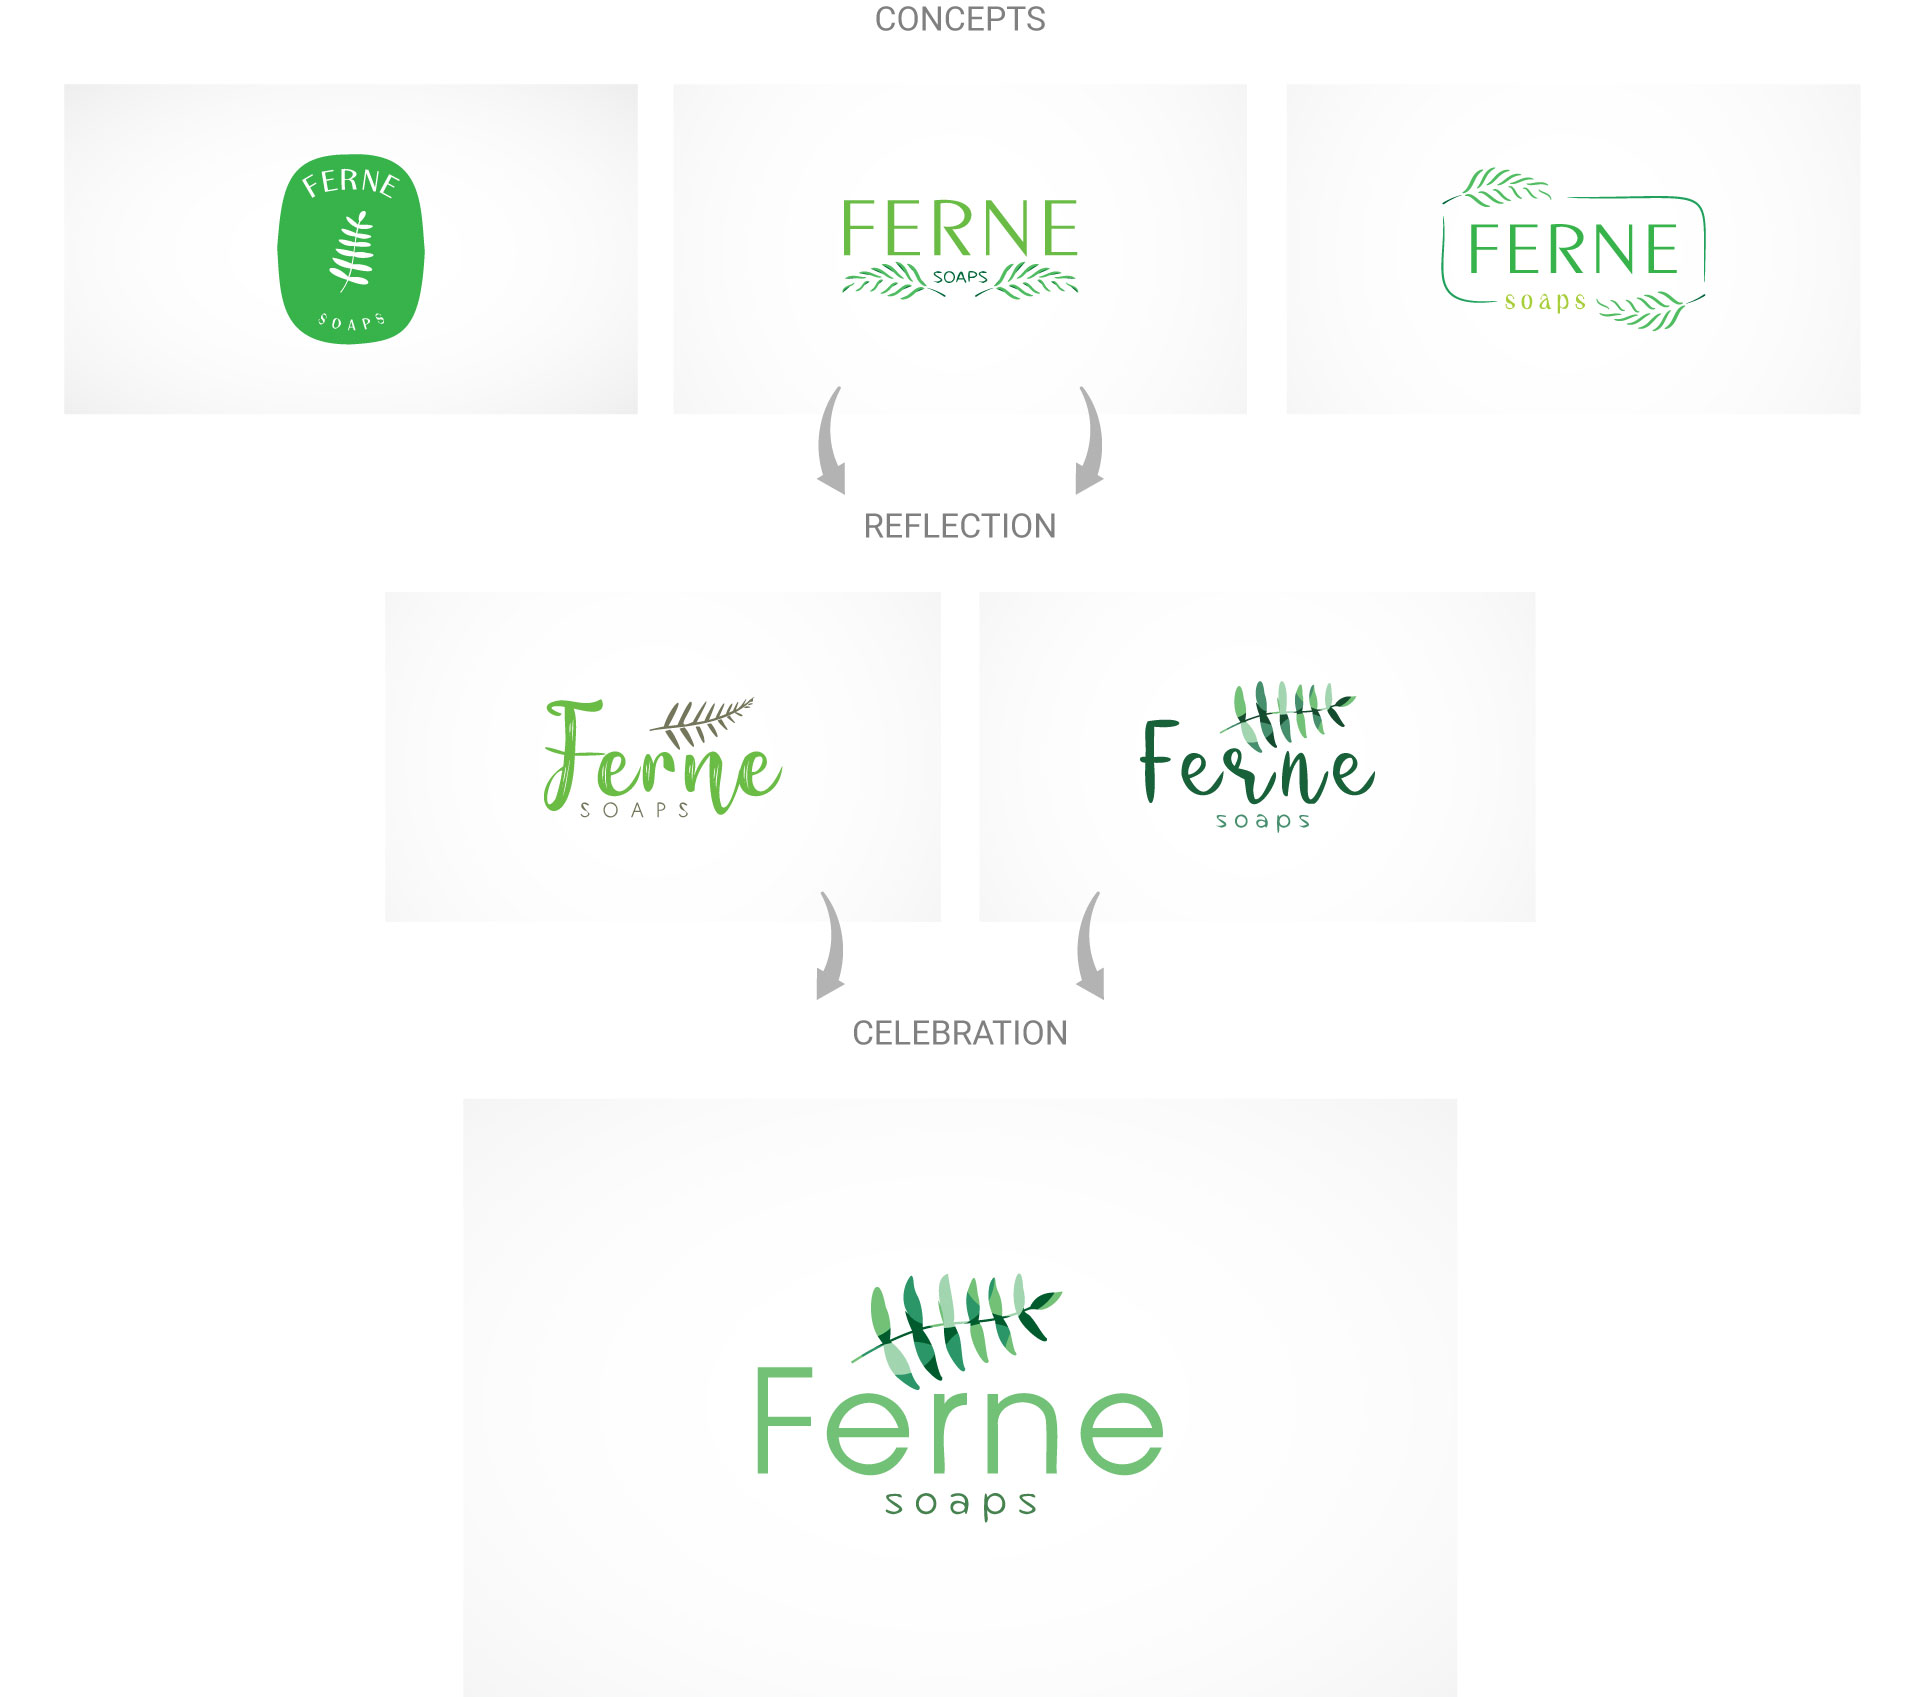 ferne-soap-logo-design-process-by-mapleweb-vancouver-canada